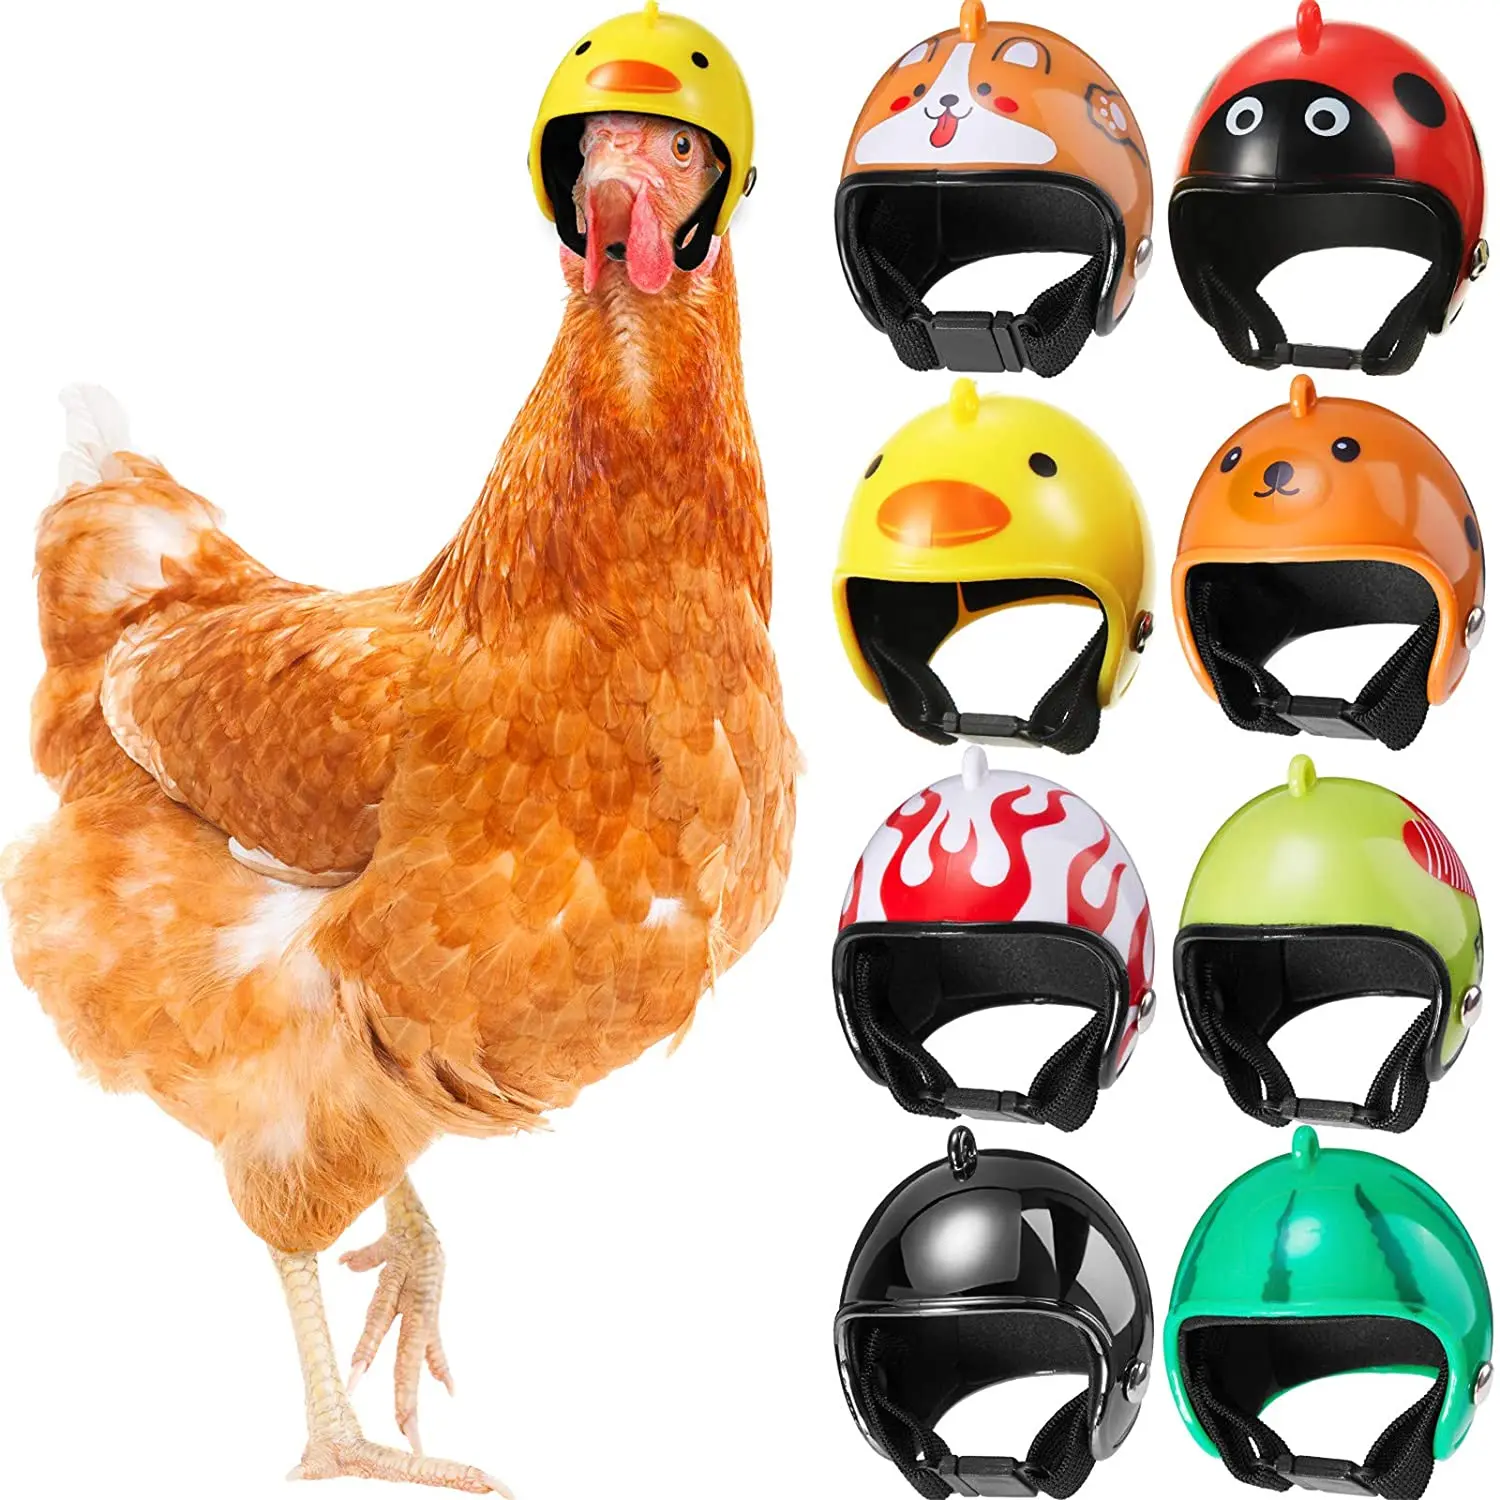 Pet Chicken Helmet Cute Funny Safety Helmet to Protect the Head of Small Poultry Suitable for Ducklings Parrots Chickens